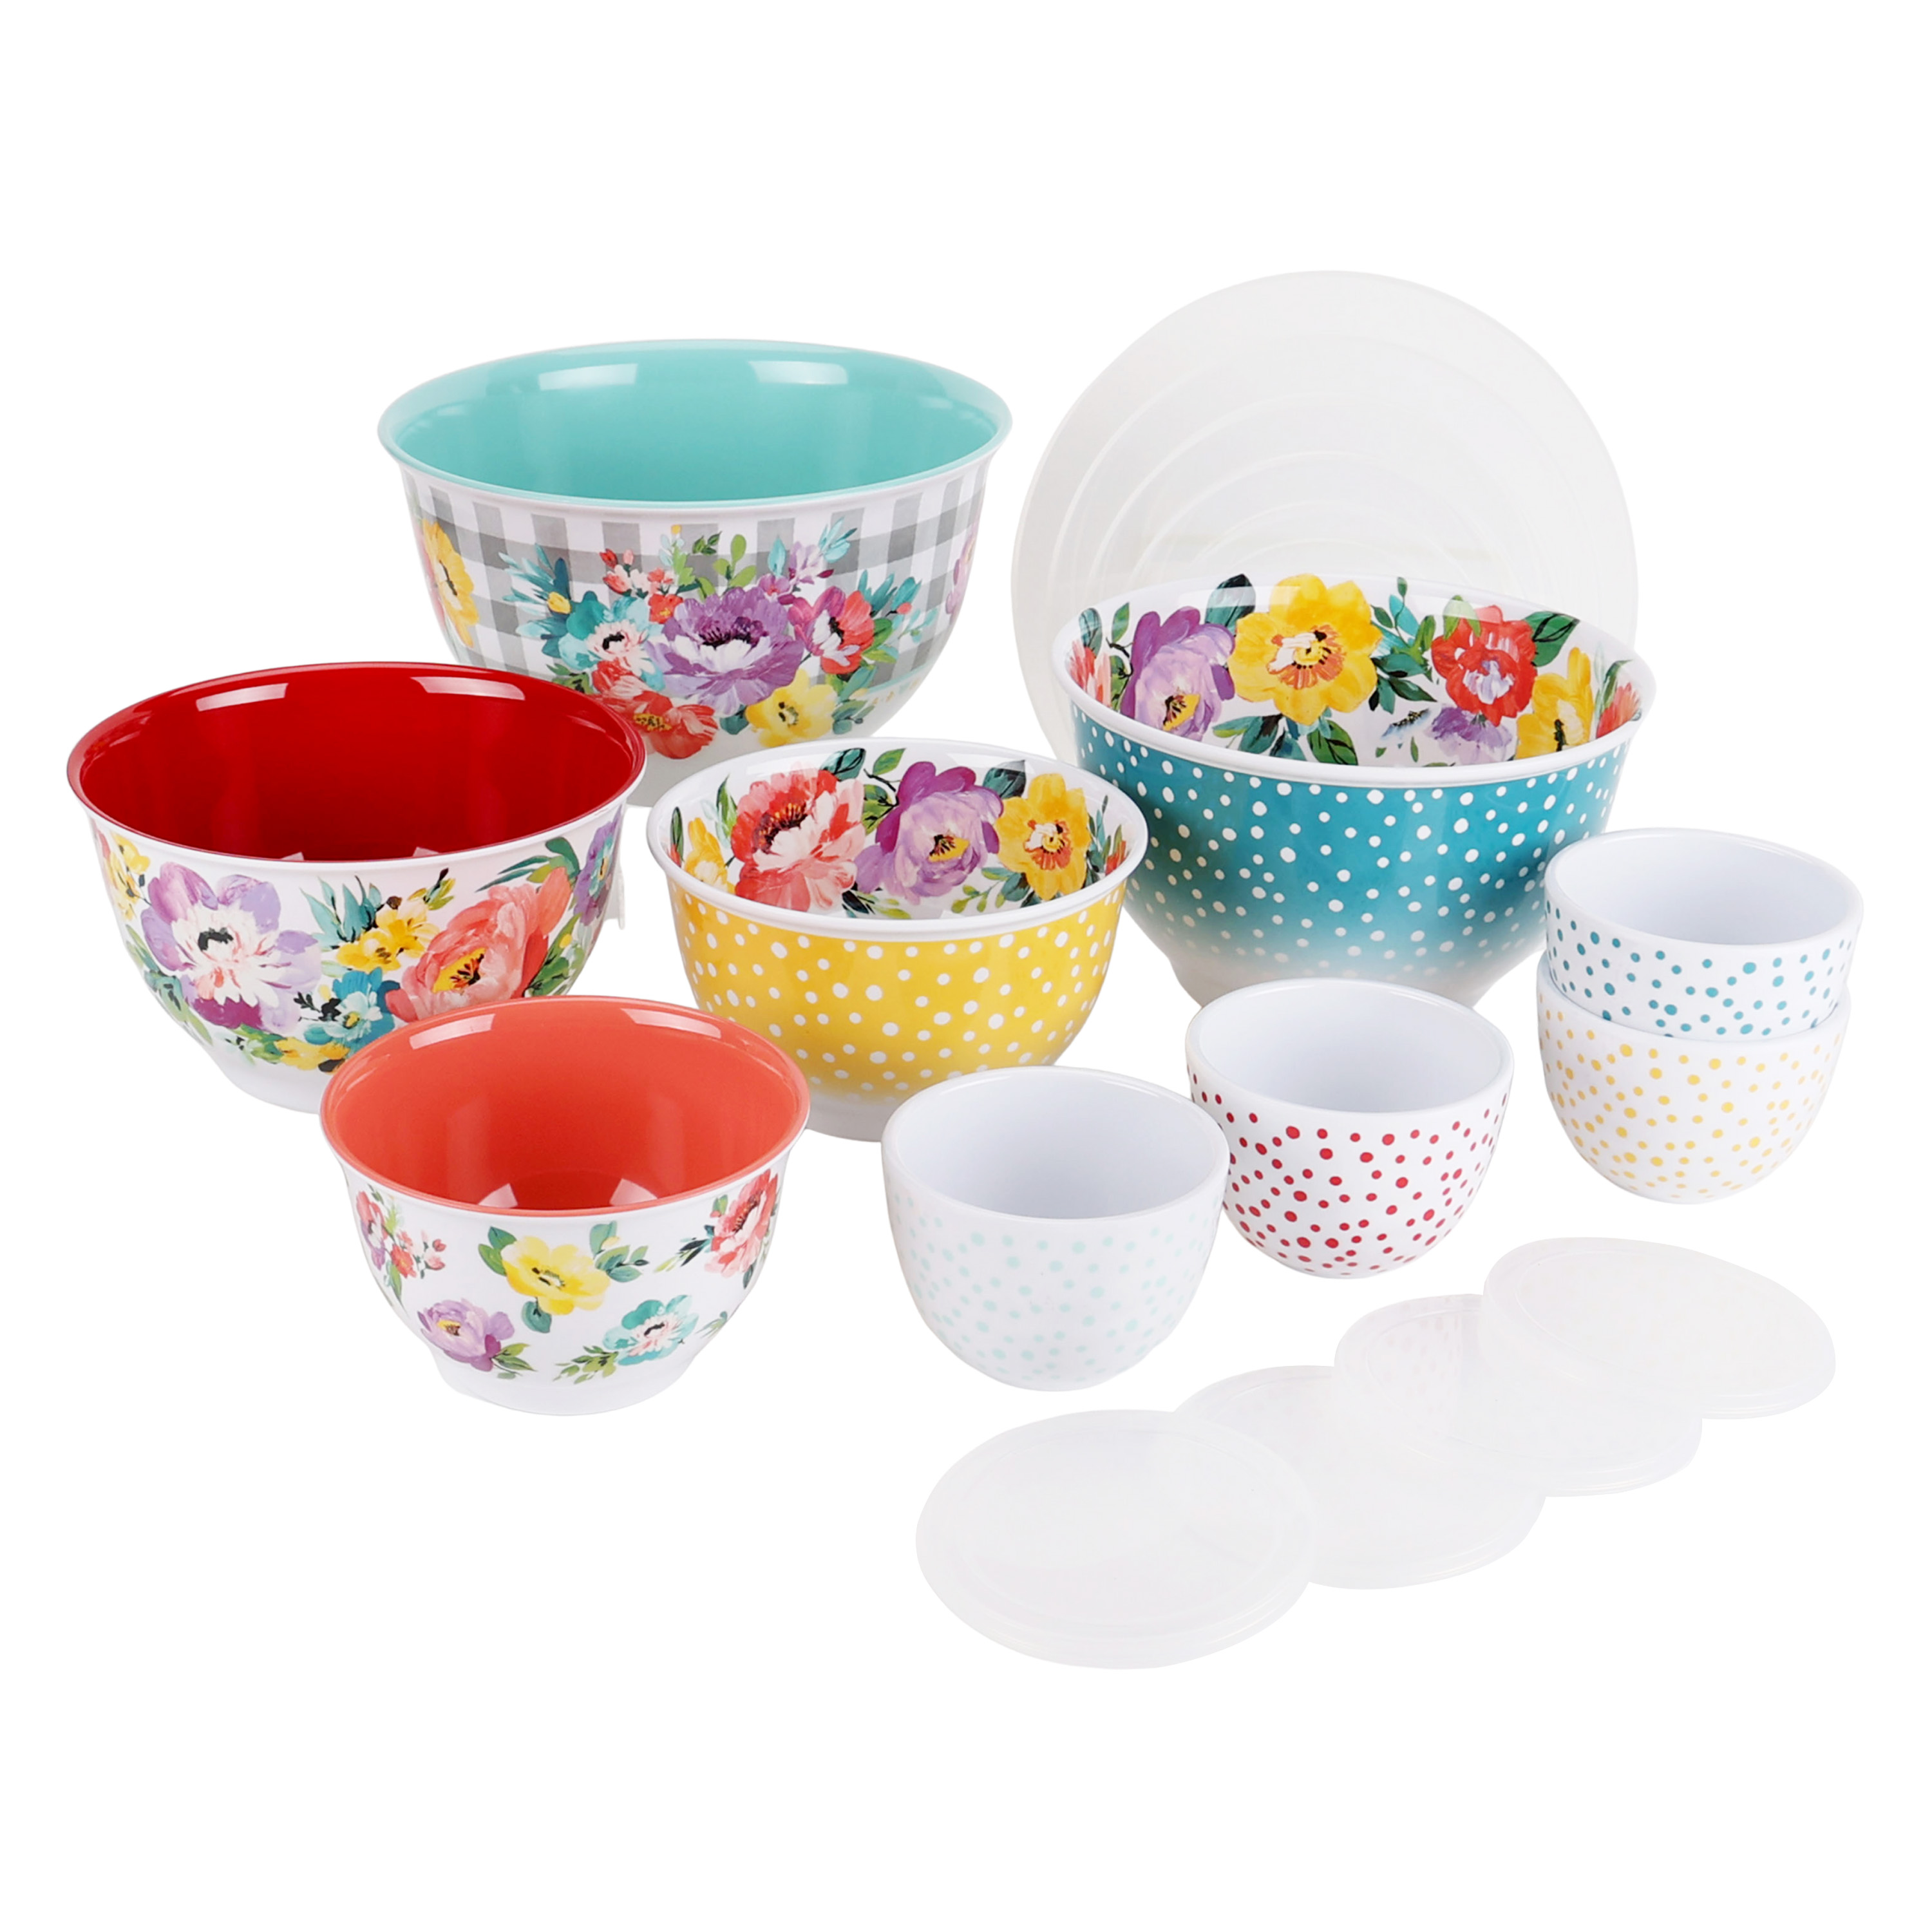 The Pioneer Woman Mixing Bowl Set with Lids, Sweet Romance, 18 Piece Set, Melamine - image 1 of 4